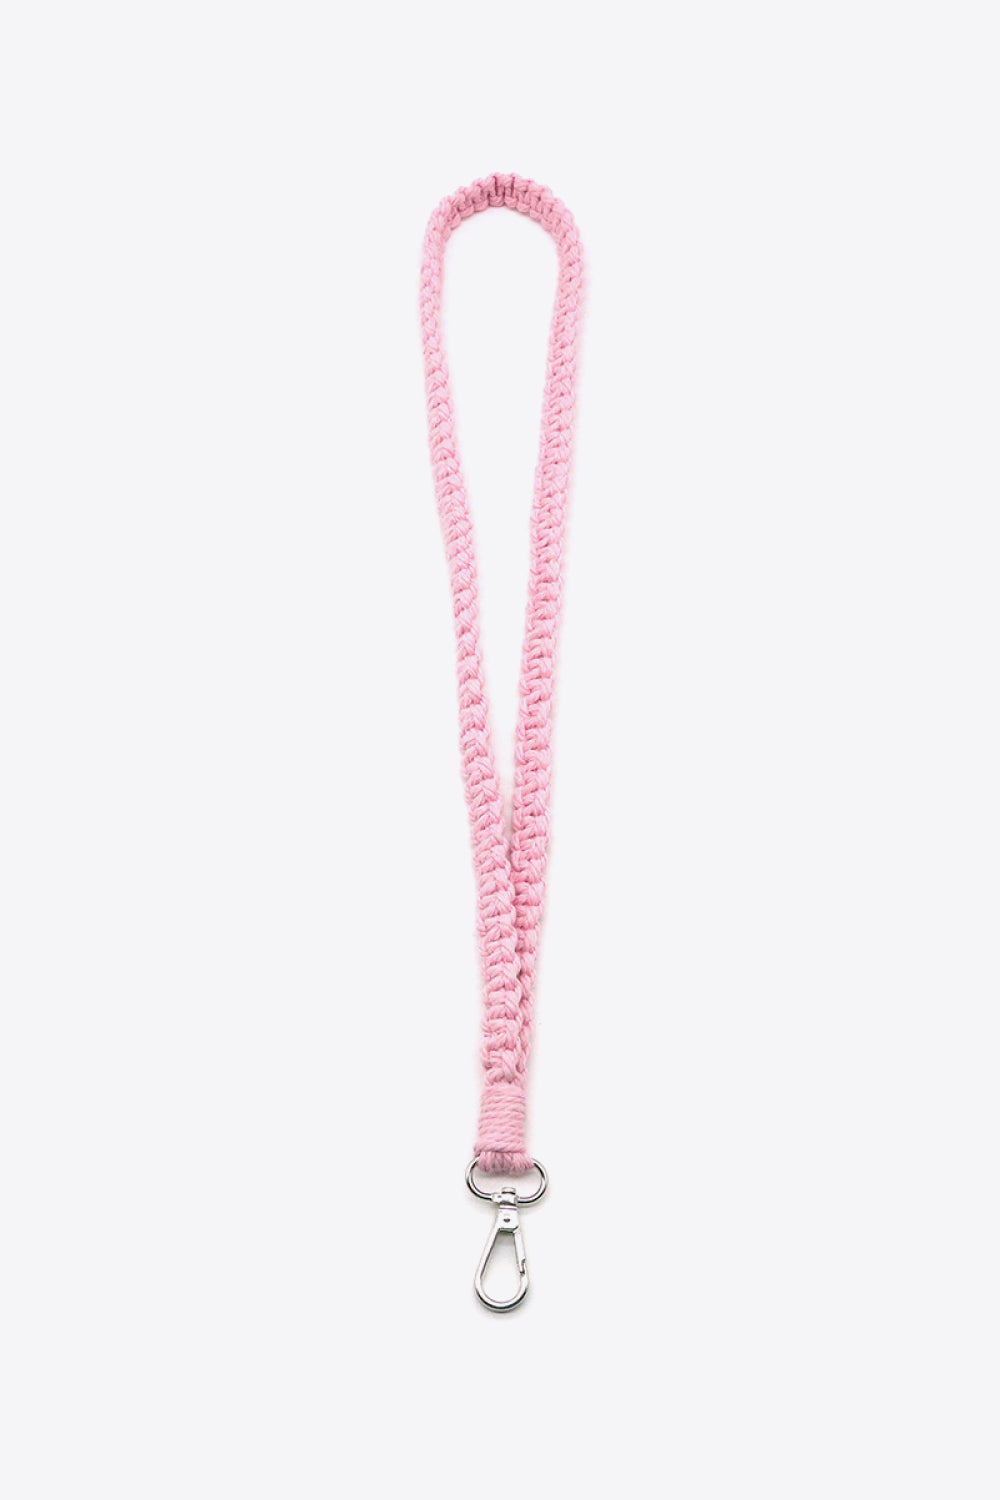 Trendsi Cupid Beauty Supplies Carnation Pink / One Size Keychains Assorted 2-Pack Hand-Woven Lanyard Keychain